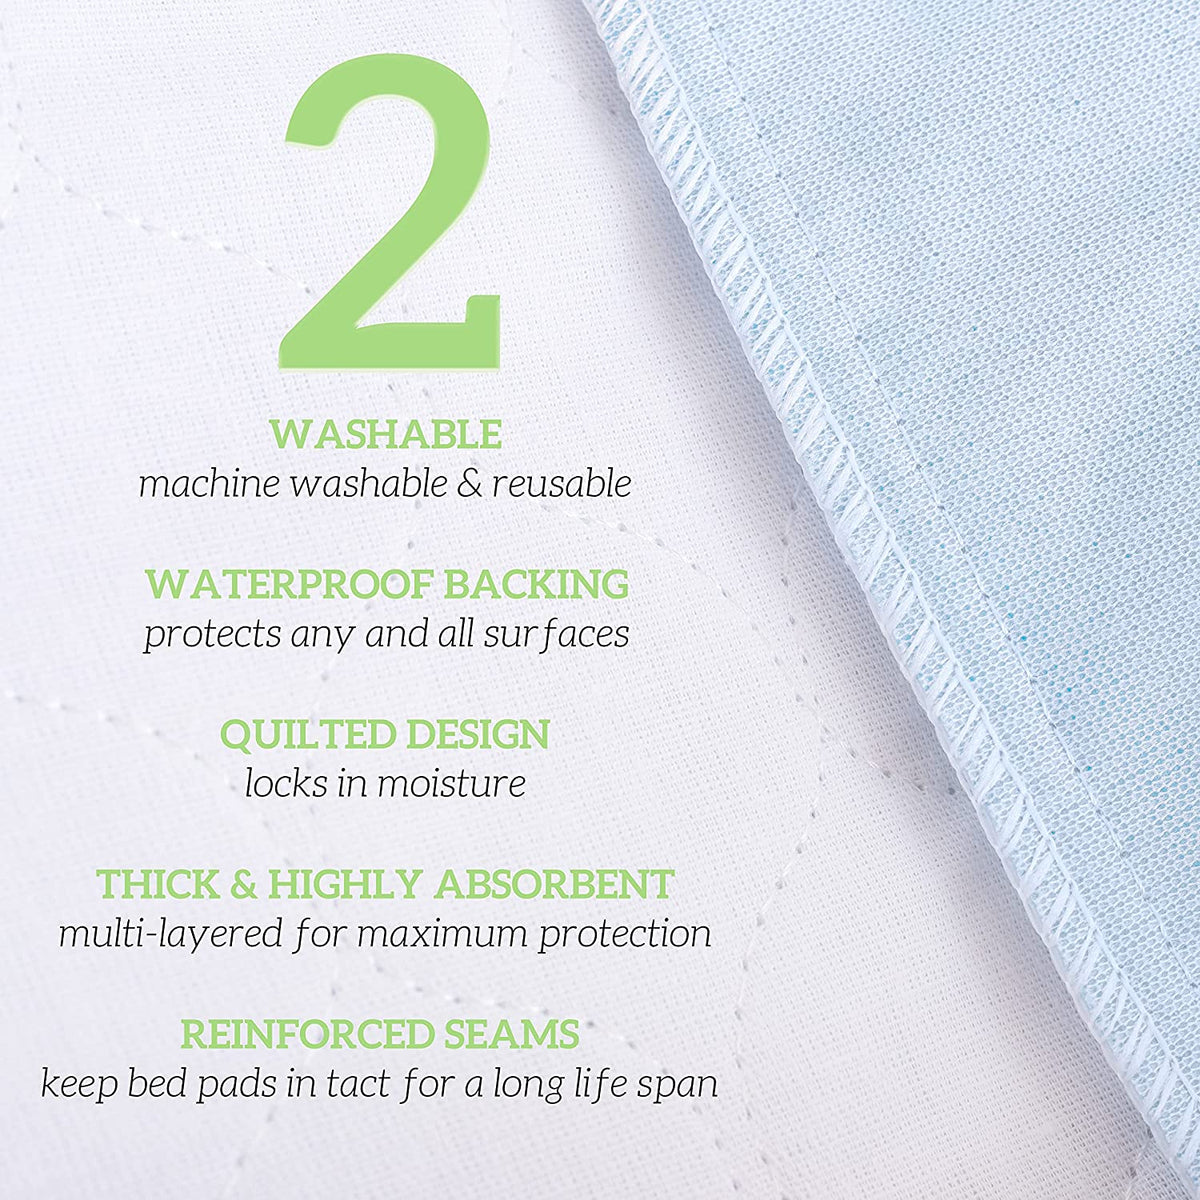 4 Pack Washable Bed Pads/Reusable Incontinence Underpads 18x24